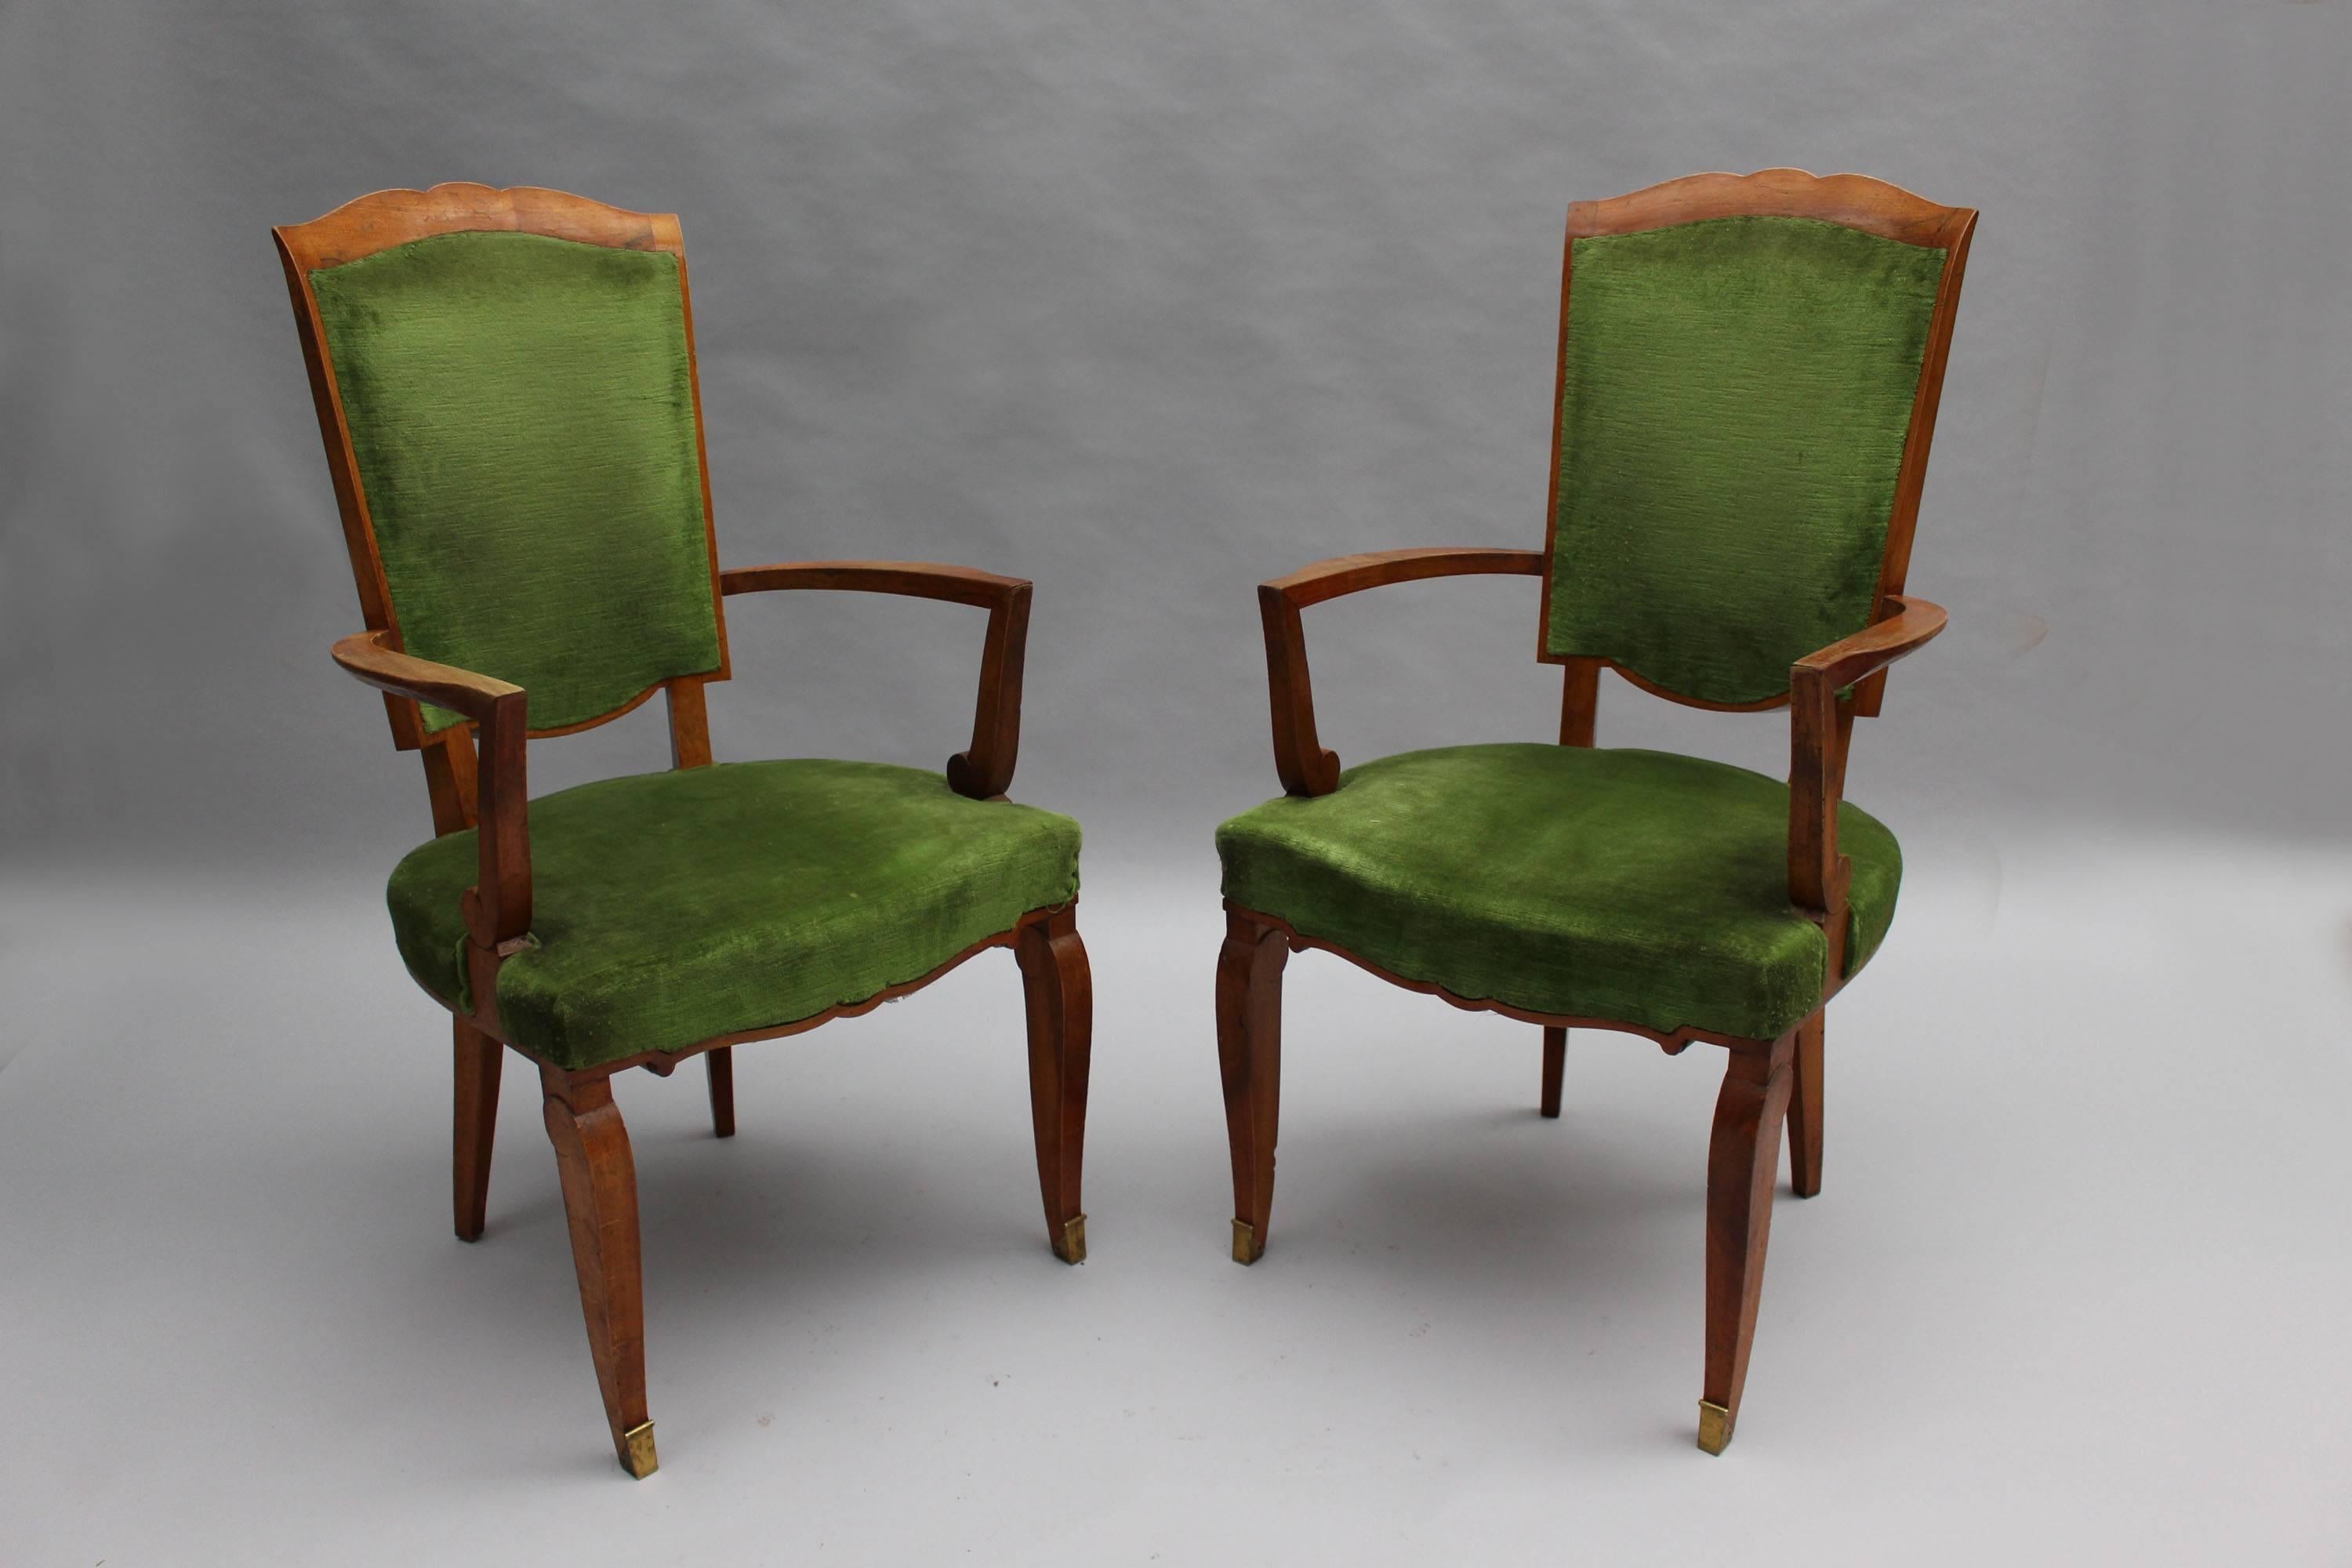 A set of ten fine French Art Deco dining chairs (eight side and two arm), in walnut with bronze sabots. 
Design by Jules Leleu for the Palais de l'Elysee in 1947

Documentation:  Similar chairs represented in the book  